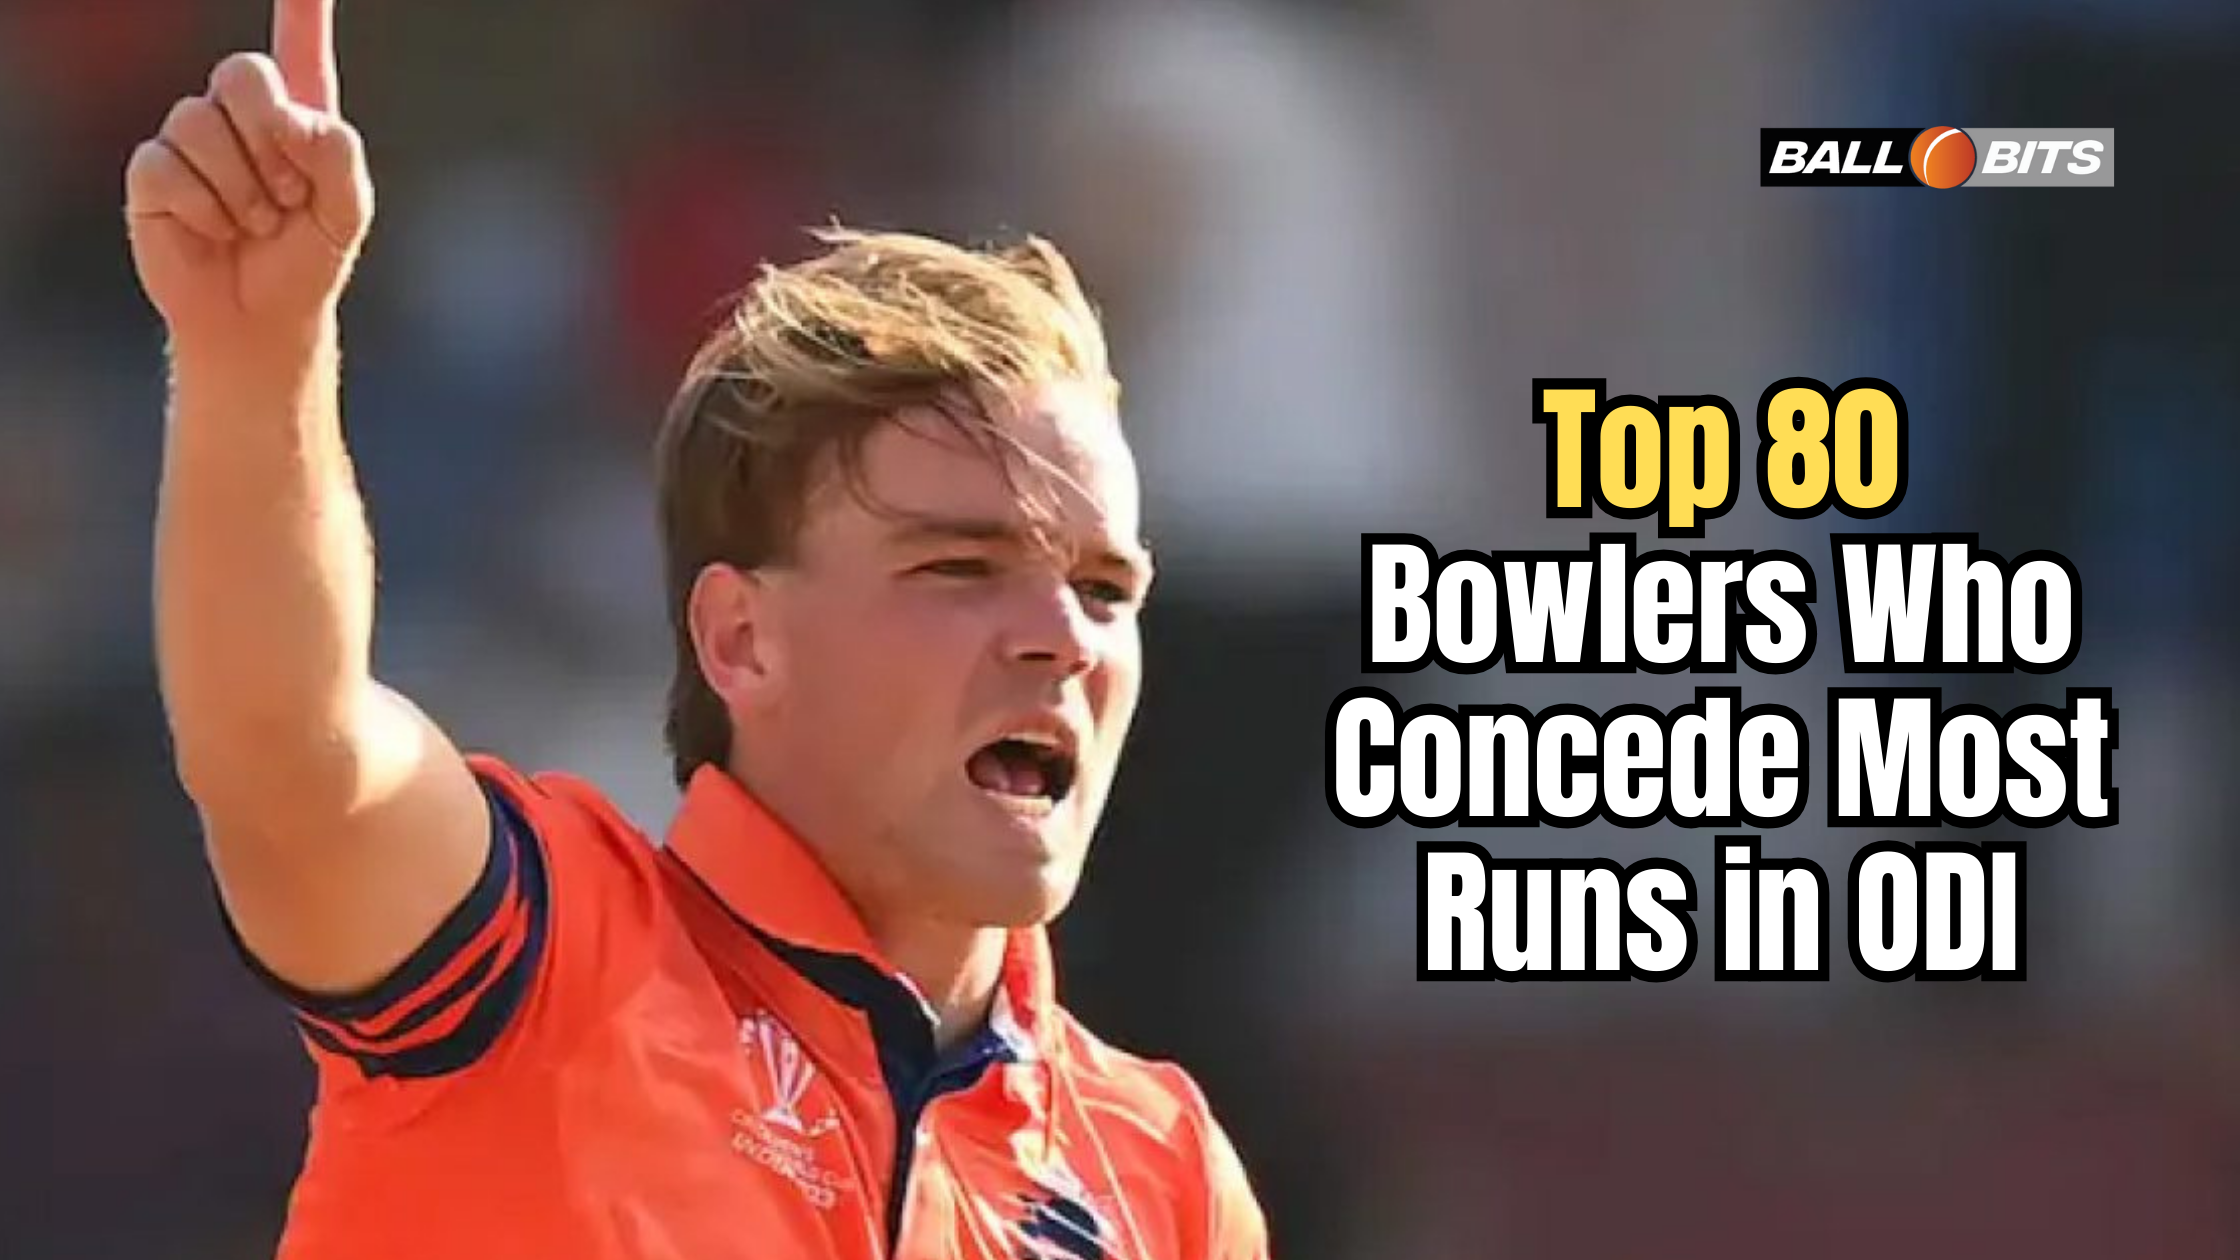 Top 80 Bowlers Who Concede Most Runs in ODI